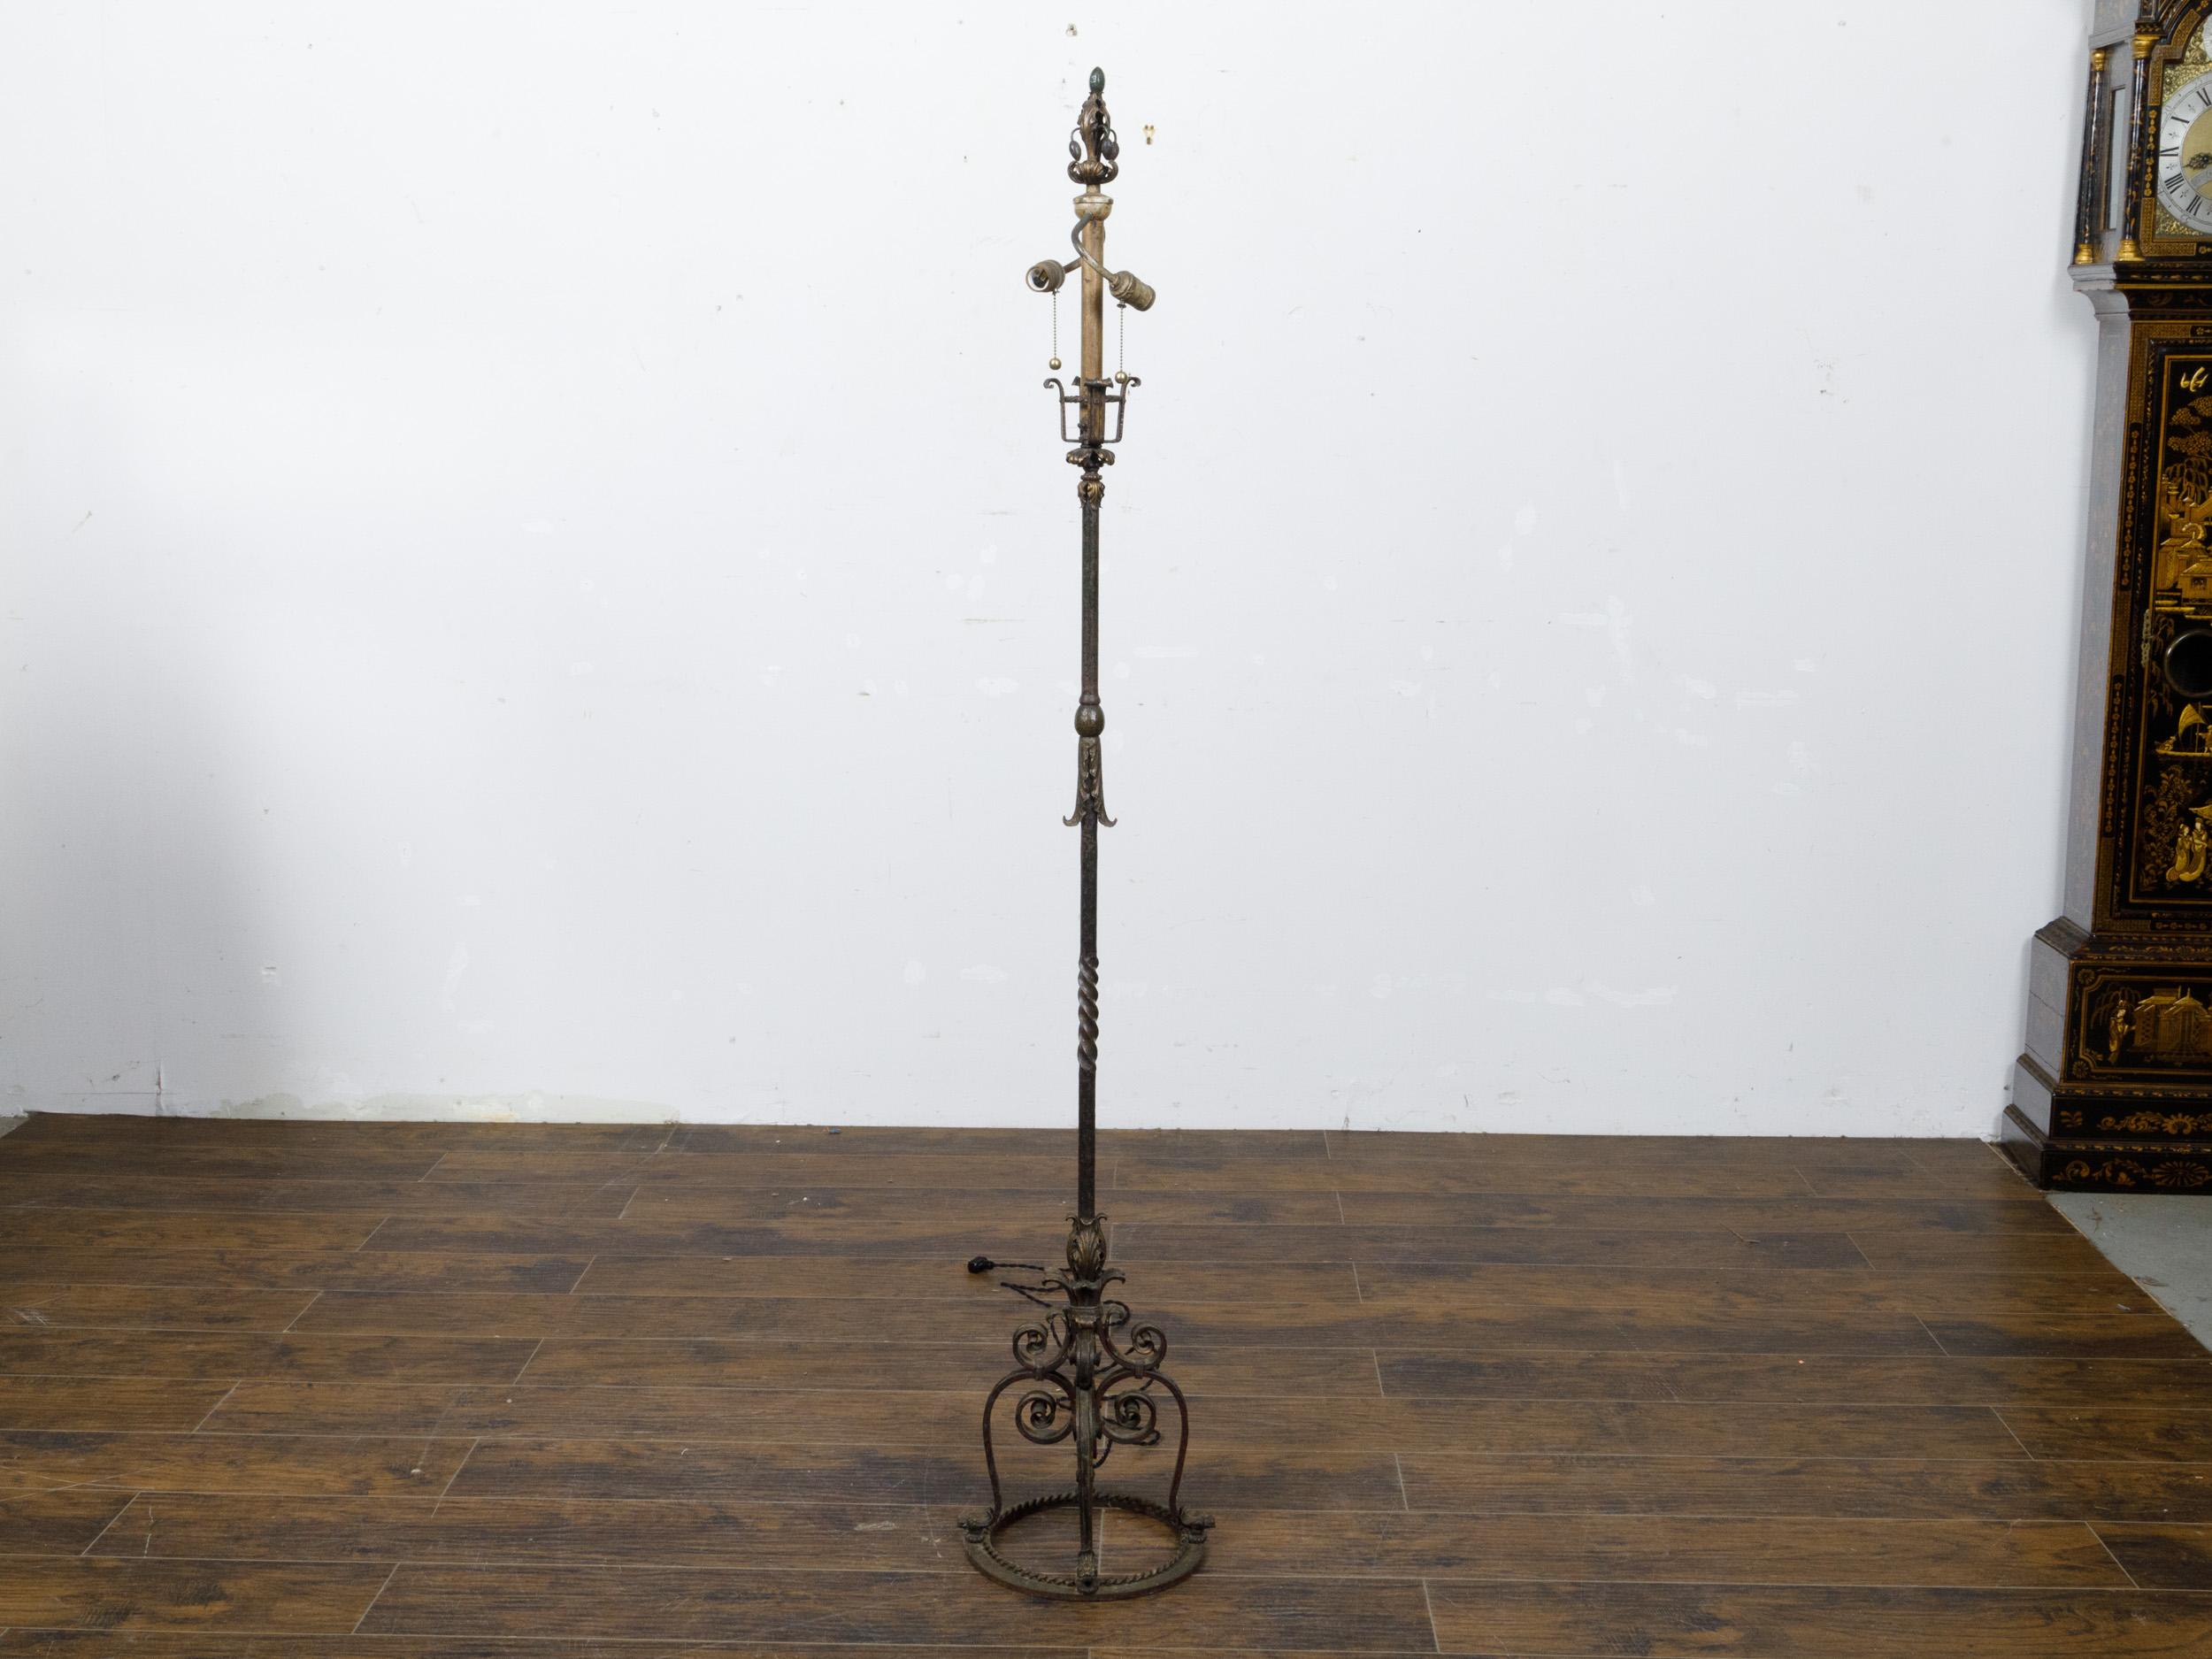 French Steel and Brass 1930s Floor Lamp with Scrolling Legs and Foliage Motifs For Sale 7